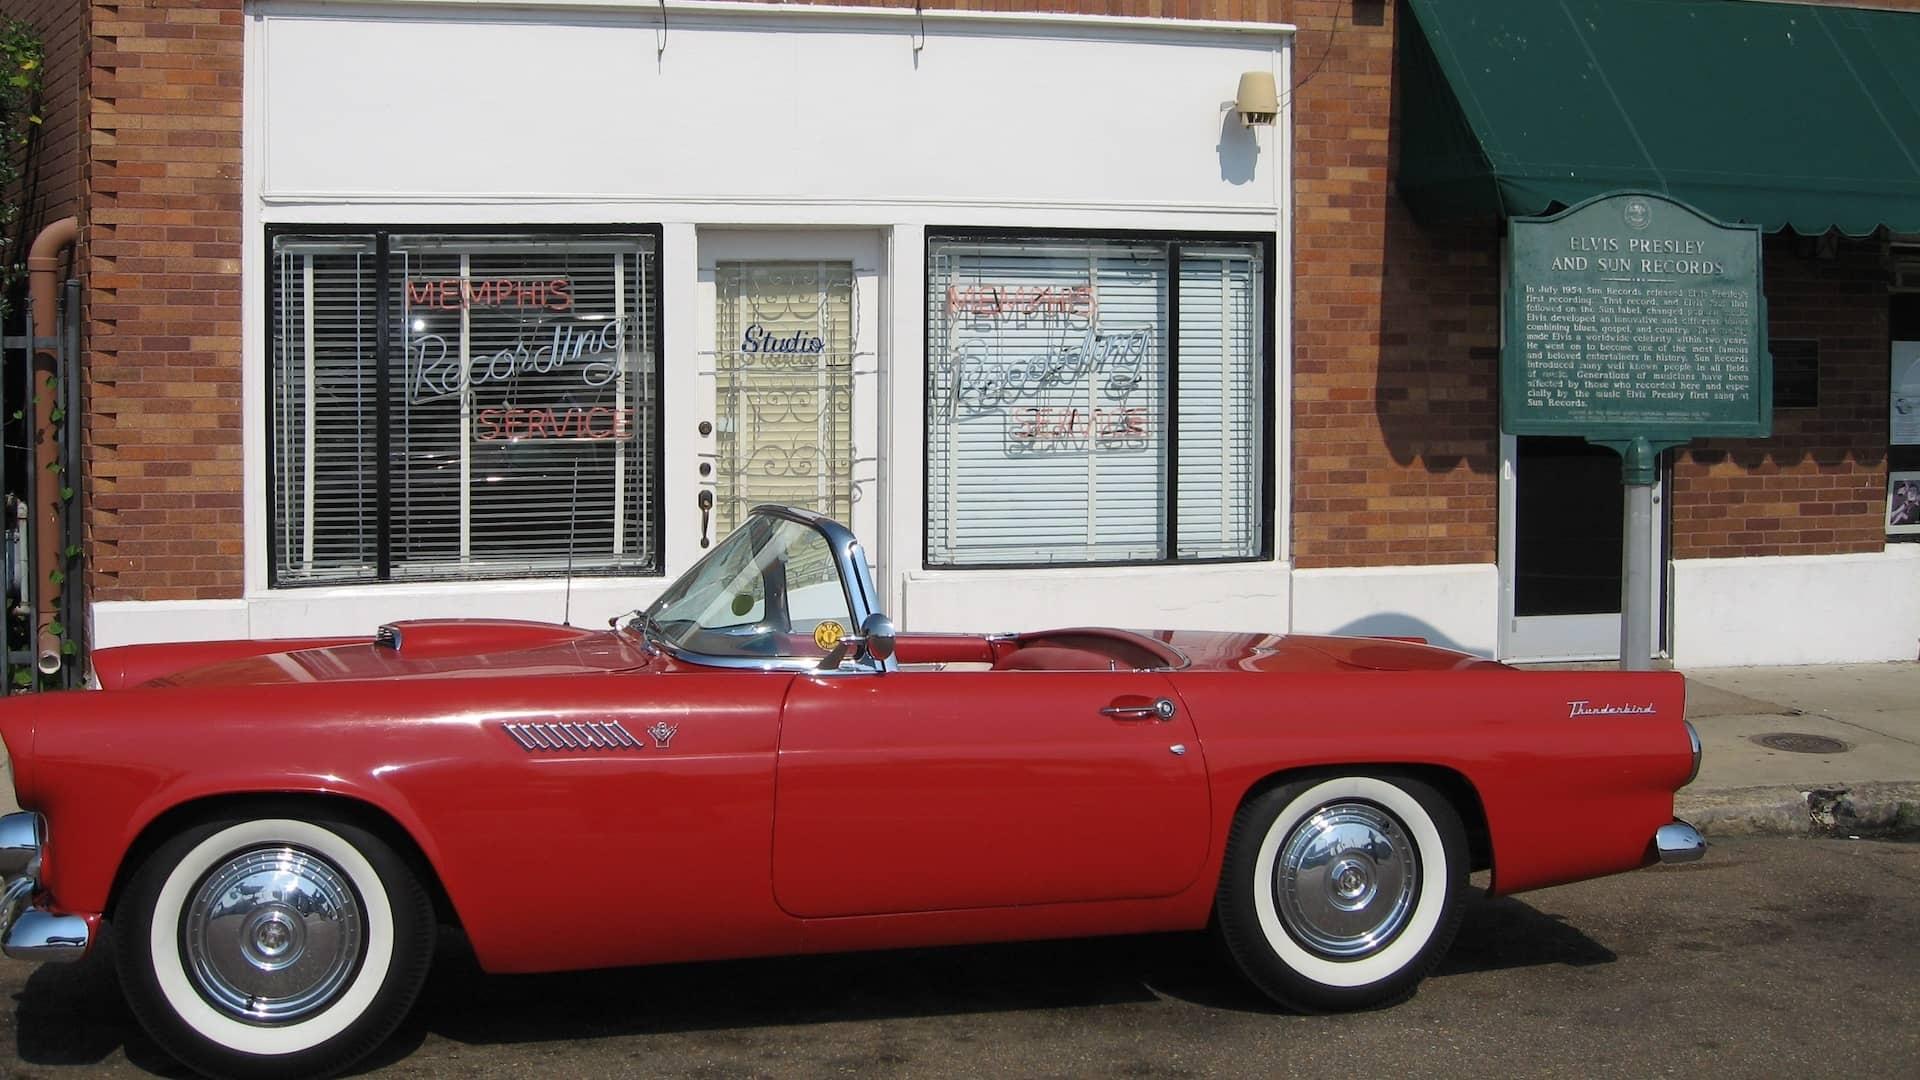 Classic convertible red car, New music special freedom songs